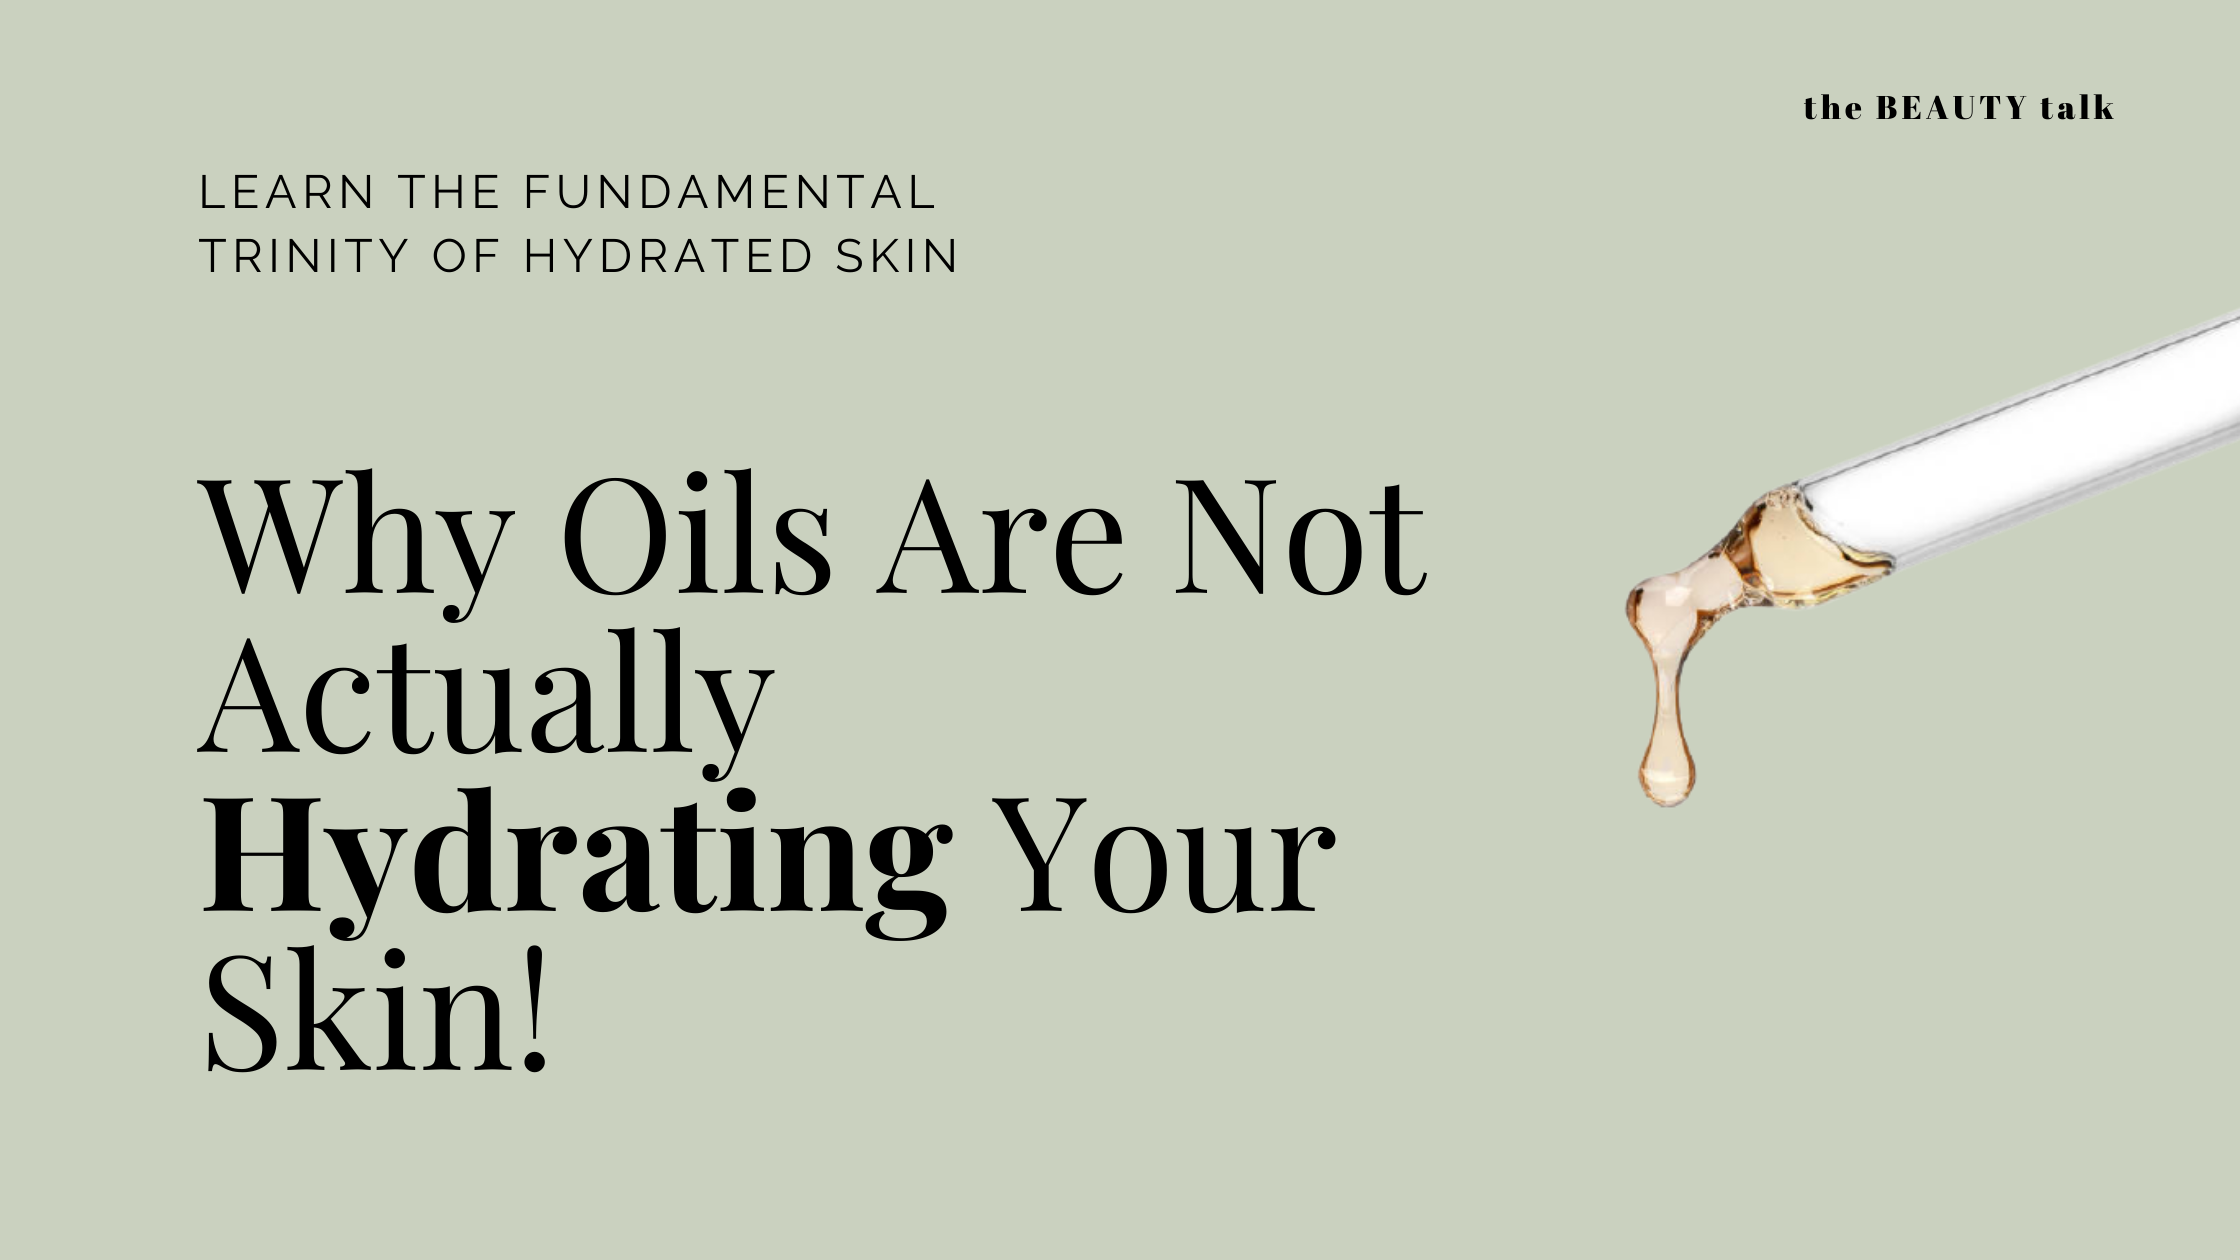 Why oils are not actually Hydrating your skin!